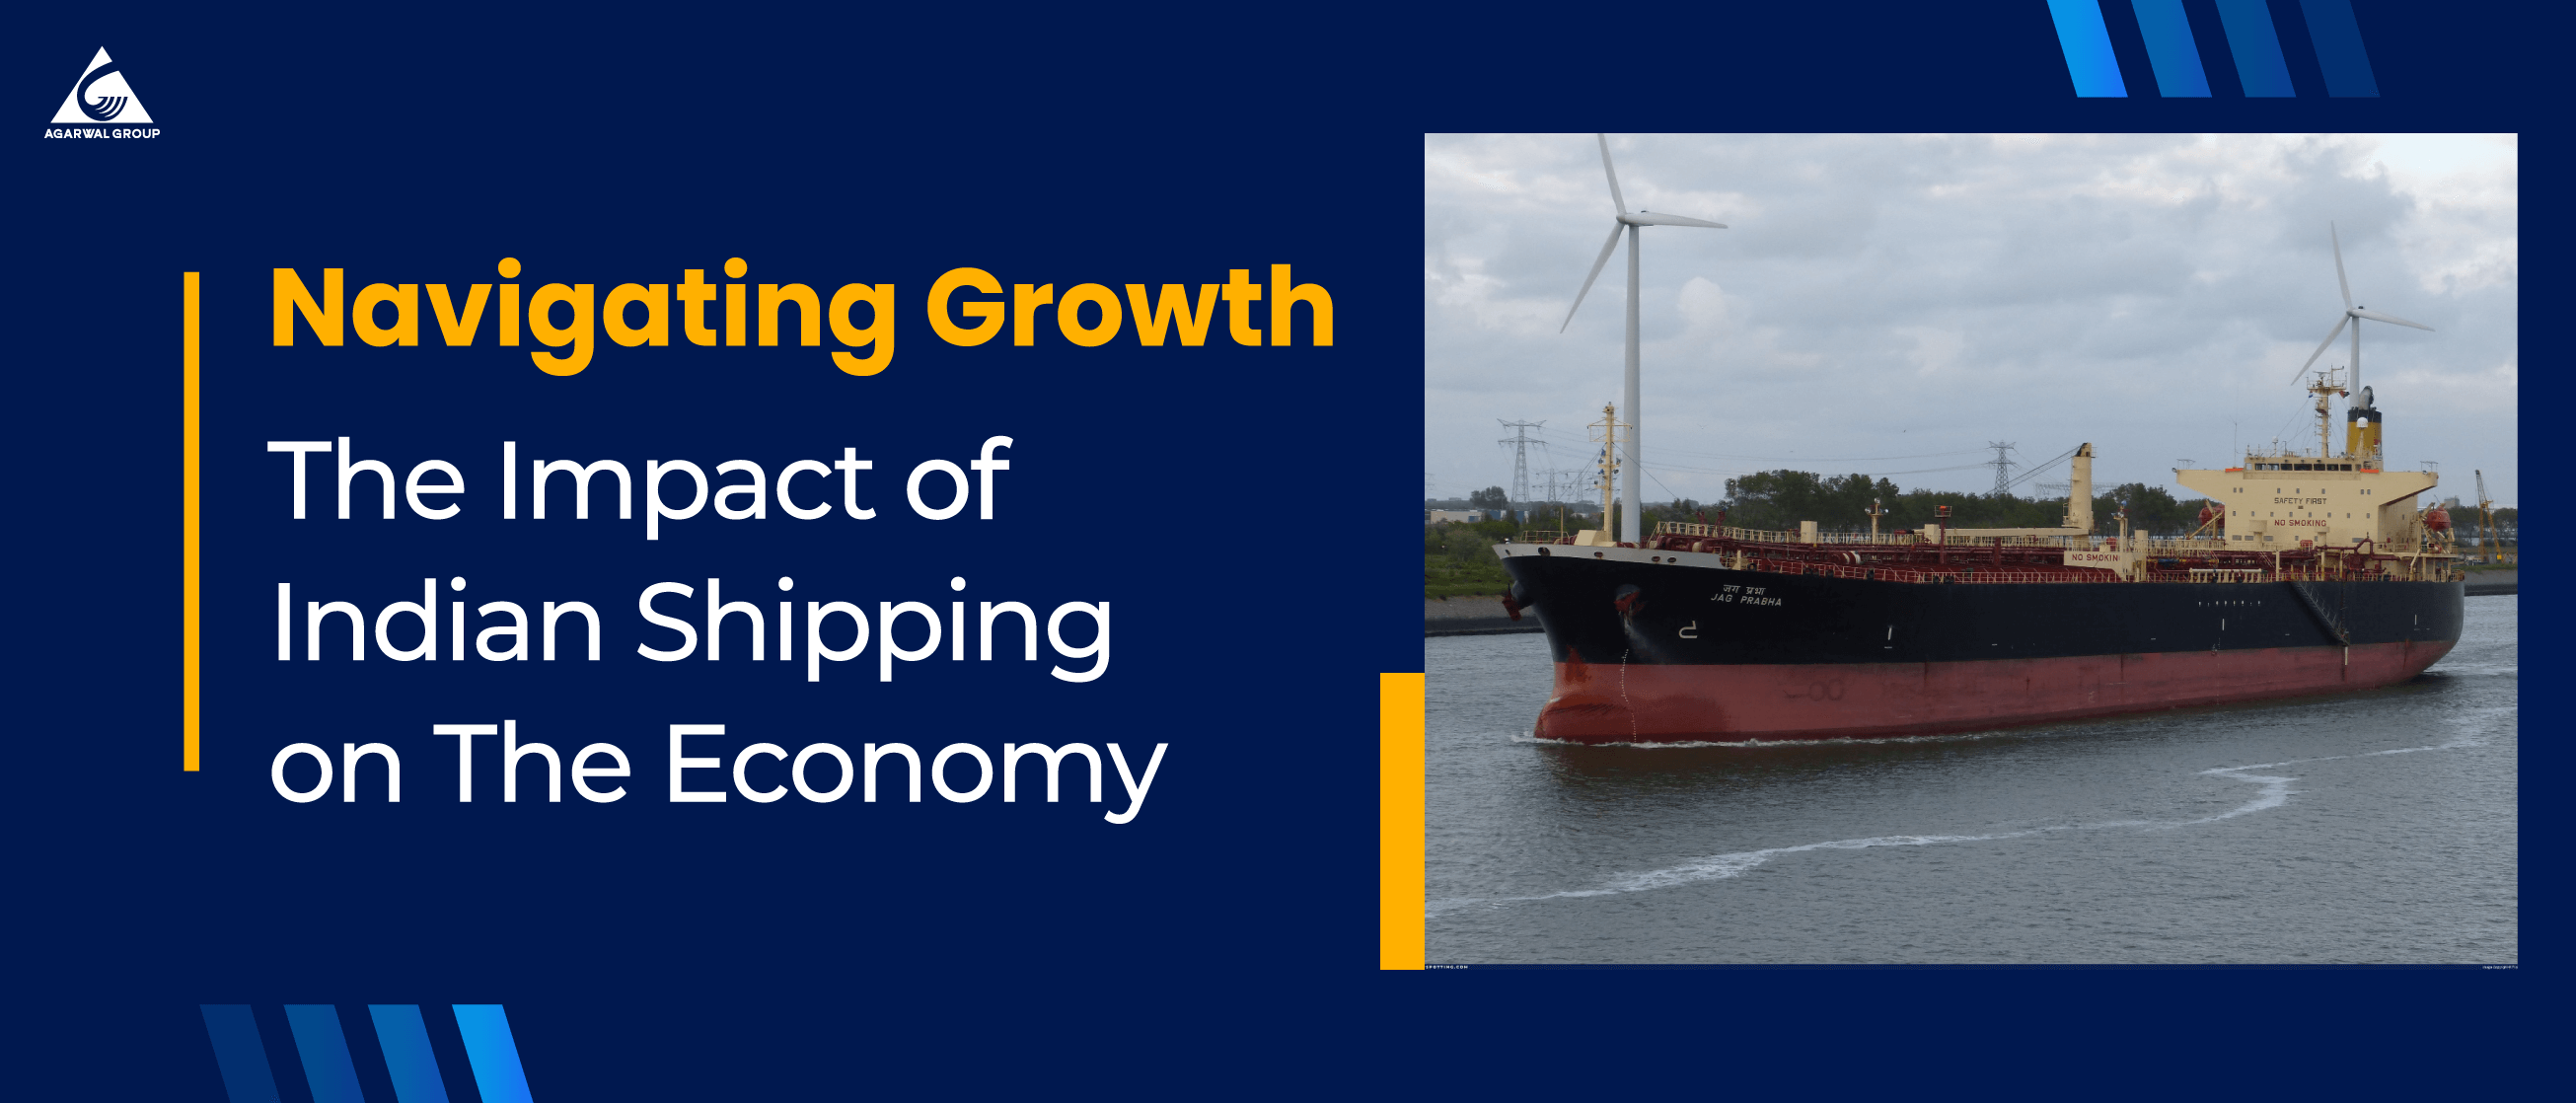 Navigating Growth: The Impact of Indian Shipping on Economy